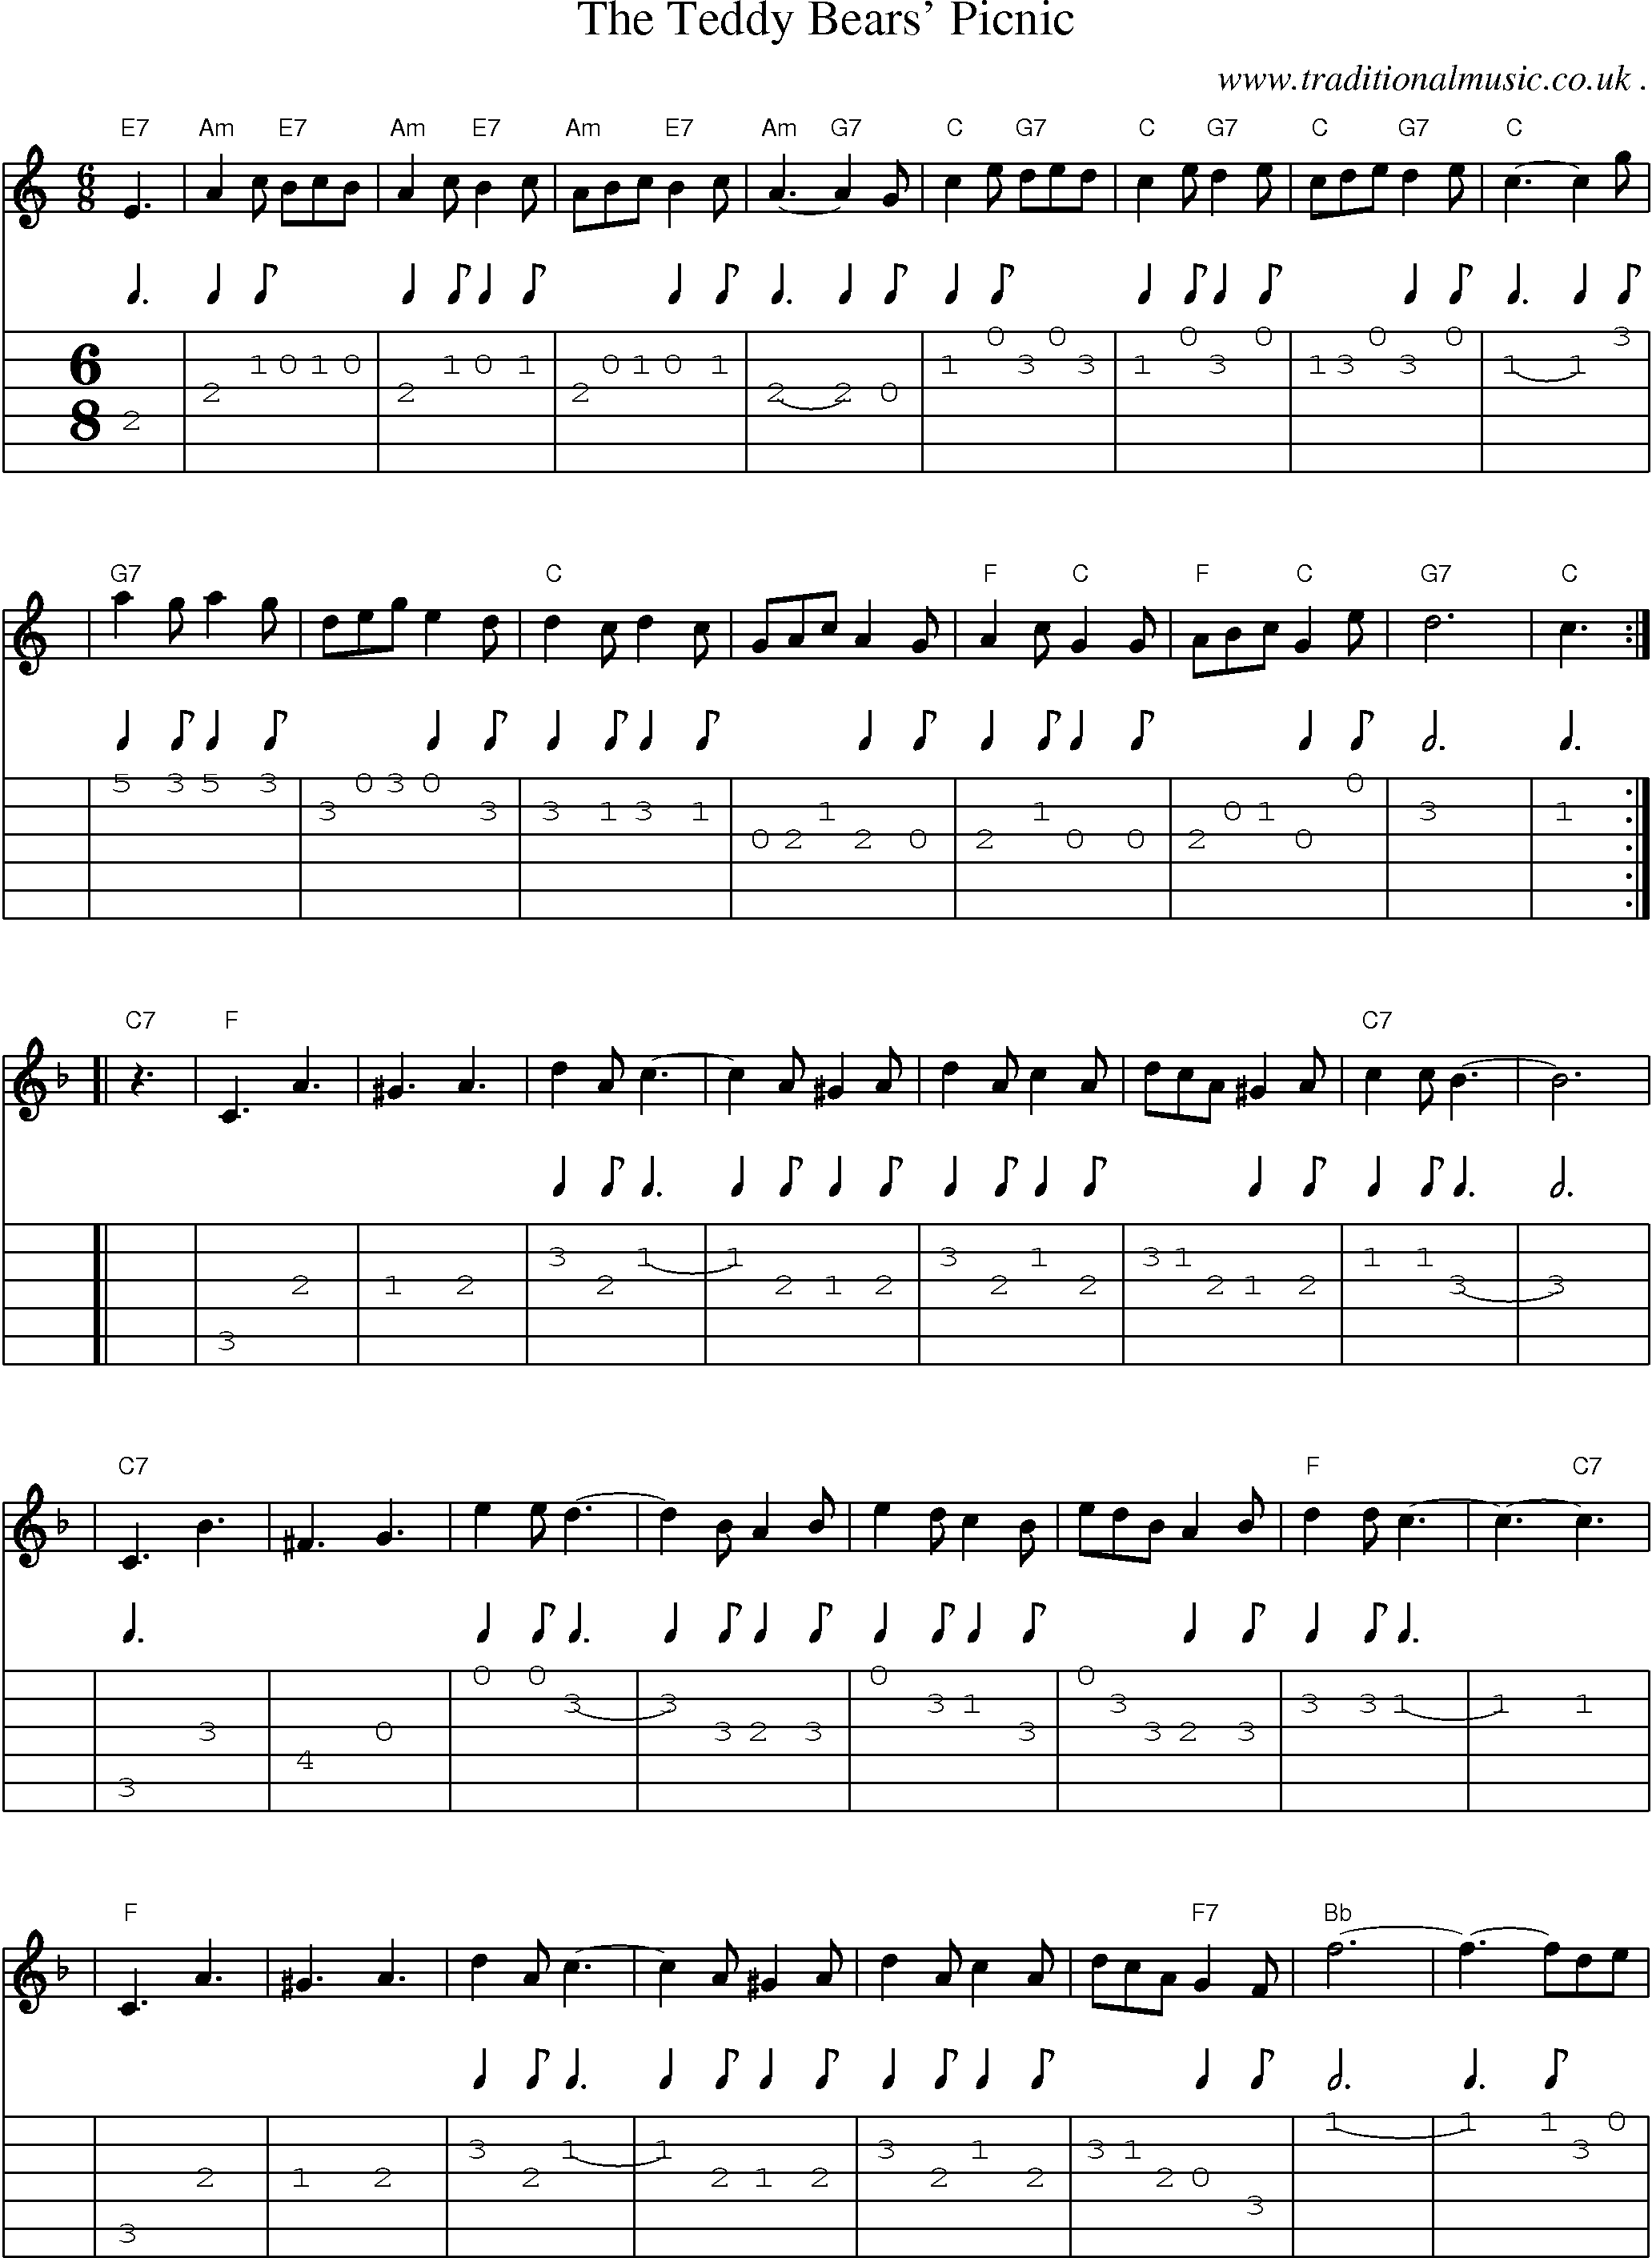 Sheet-music  score, Chords and Guitar Tabs for The Teddy Bears Picnic